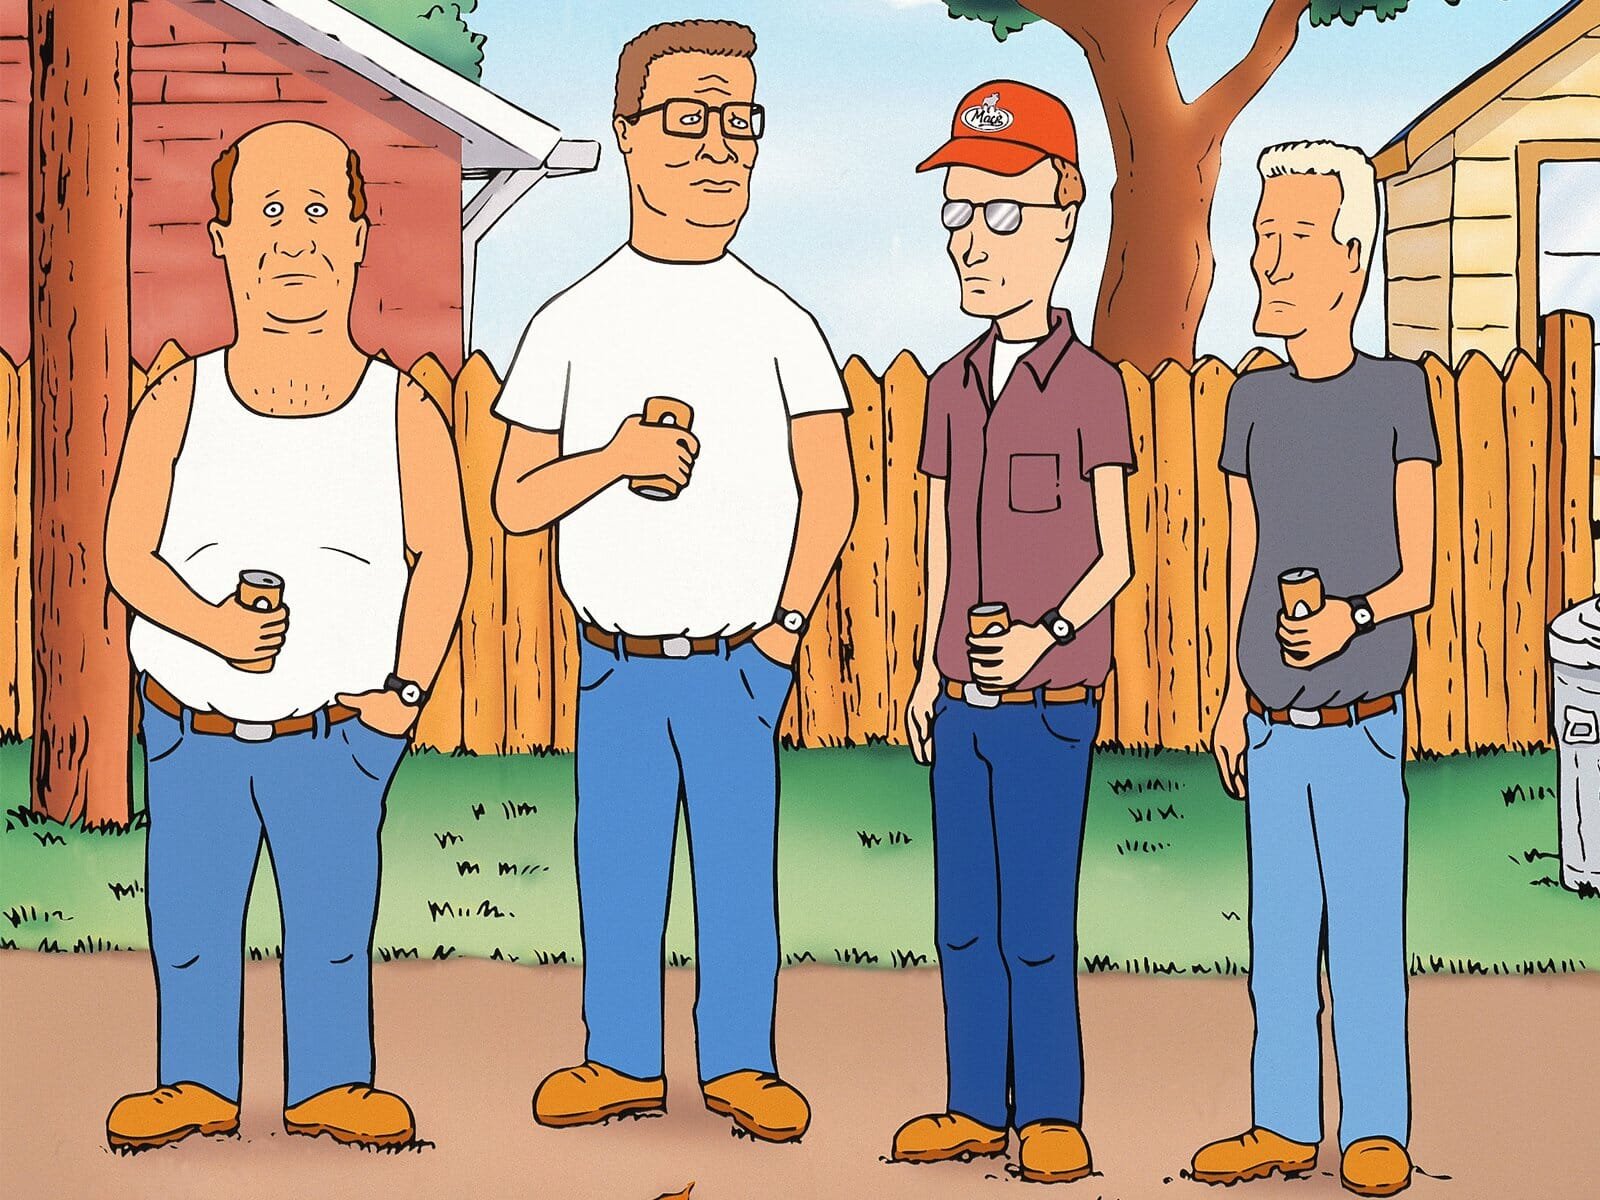 Best king of the hill episodes: A Beer Can Named Desire (Season 4, Episode 6)